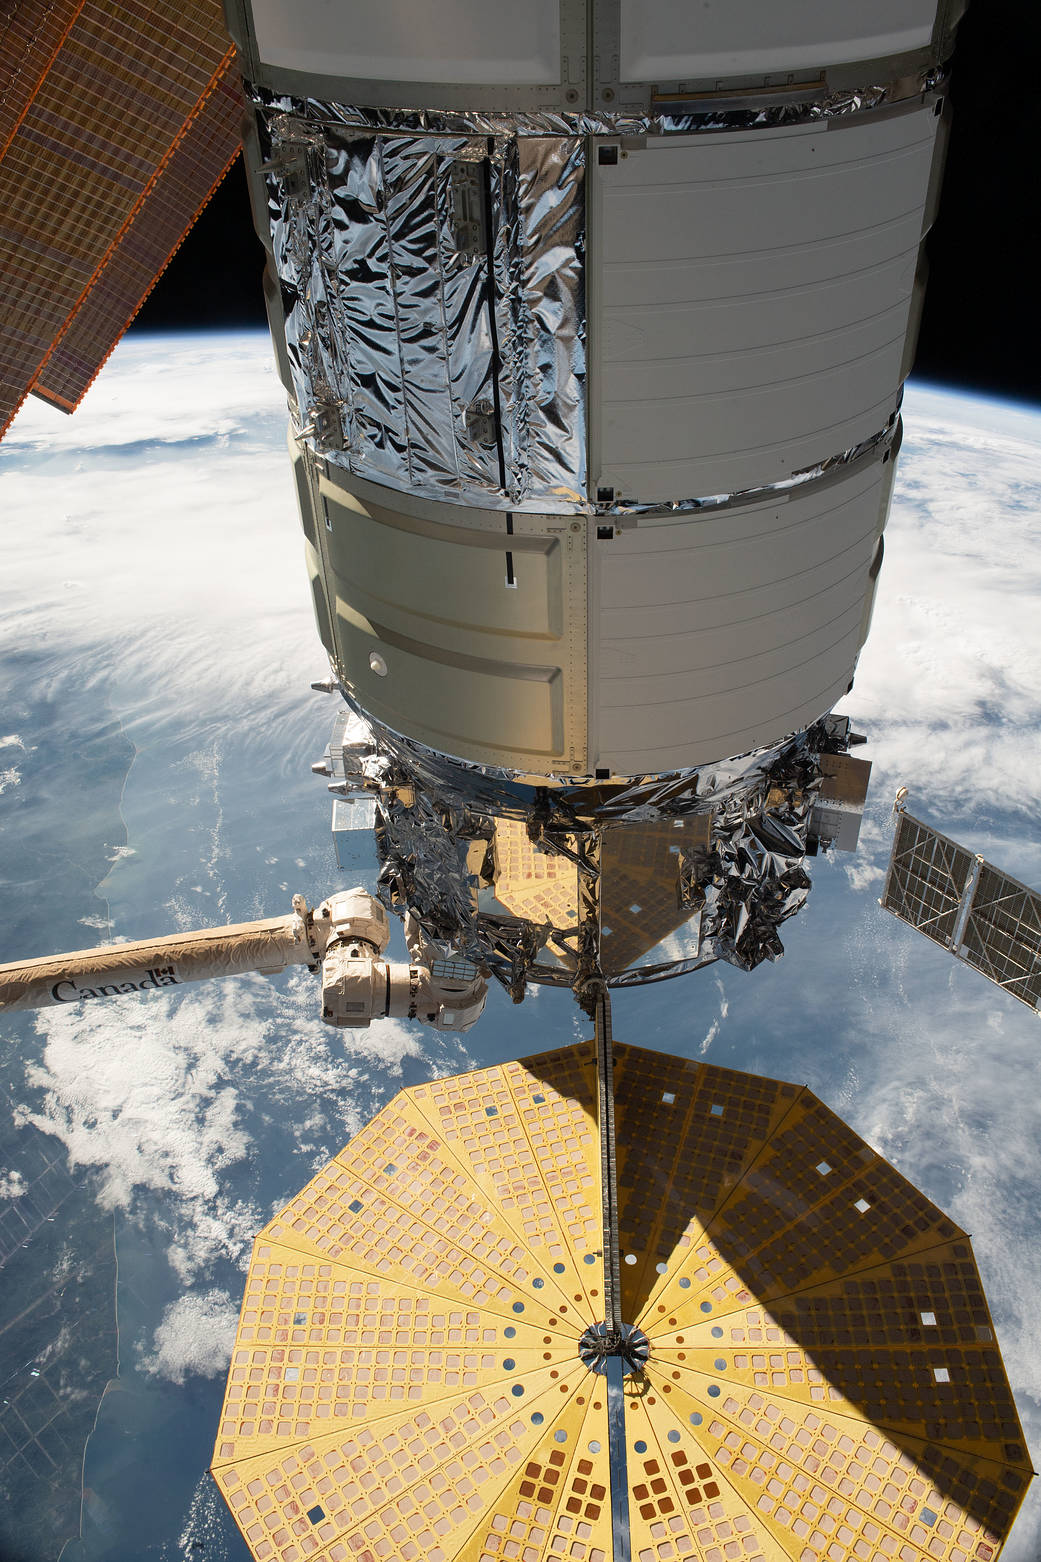 Cygnus in the grips of the Canadarm2 robotic arm